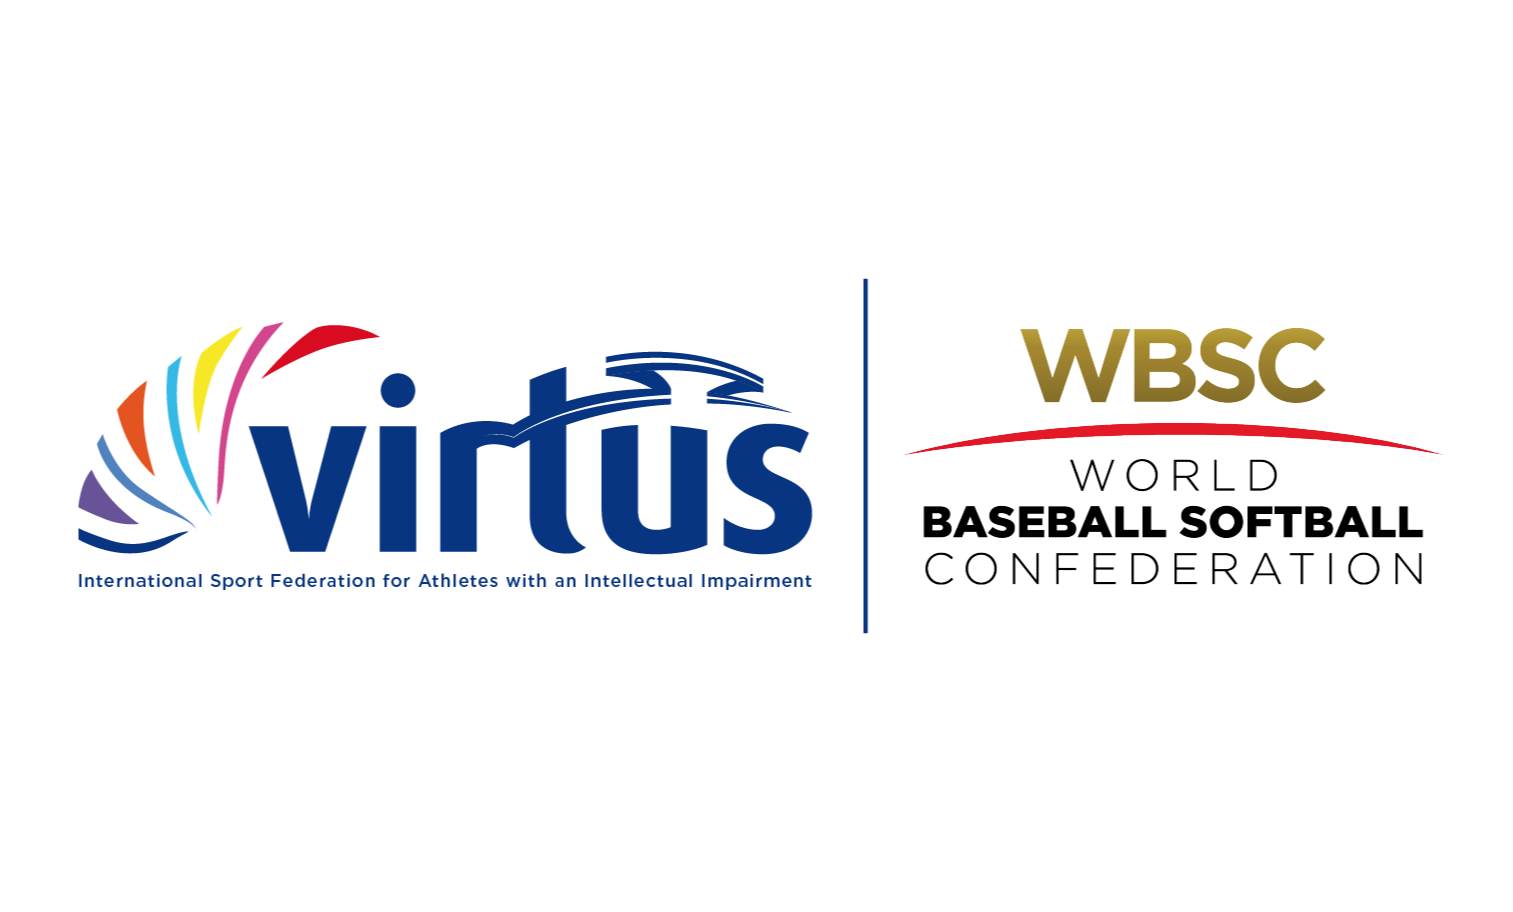 WBSC signs MoU with Virtus to promote baseball and softball 